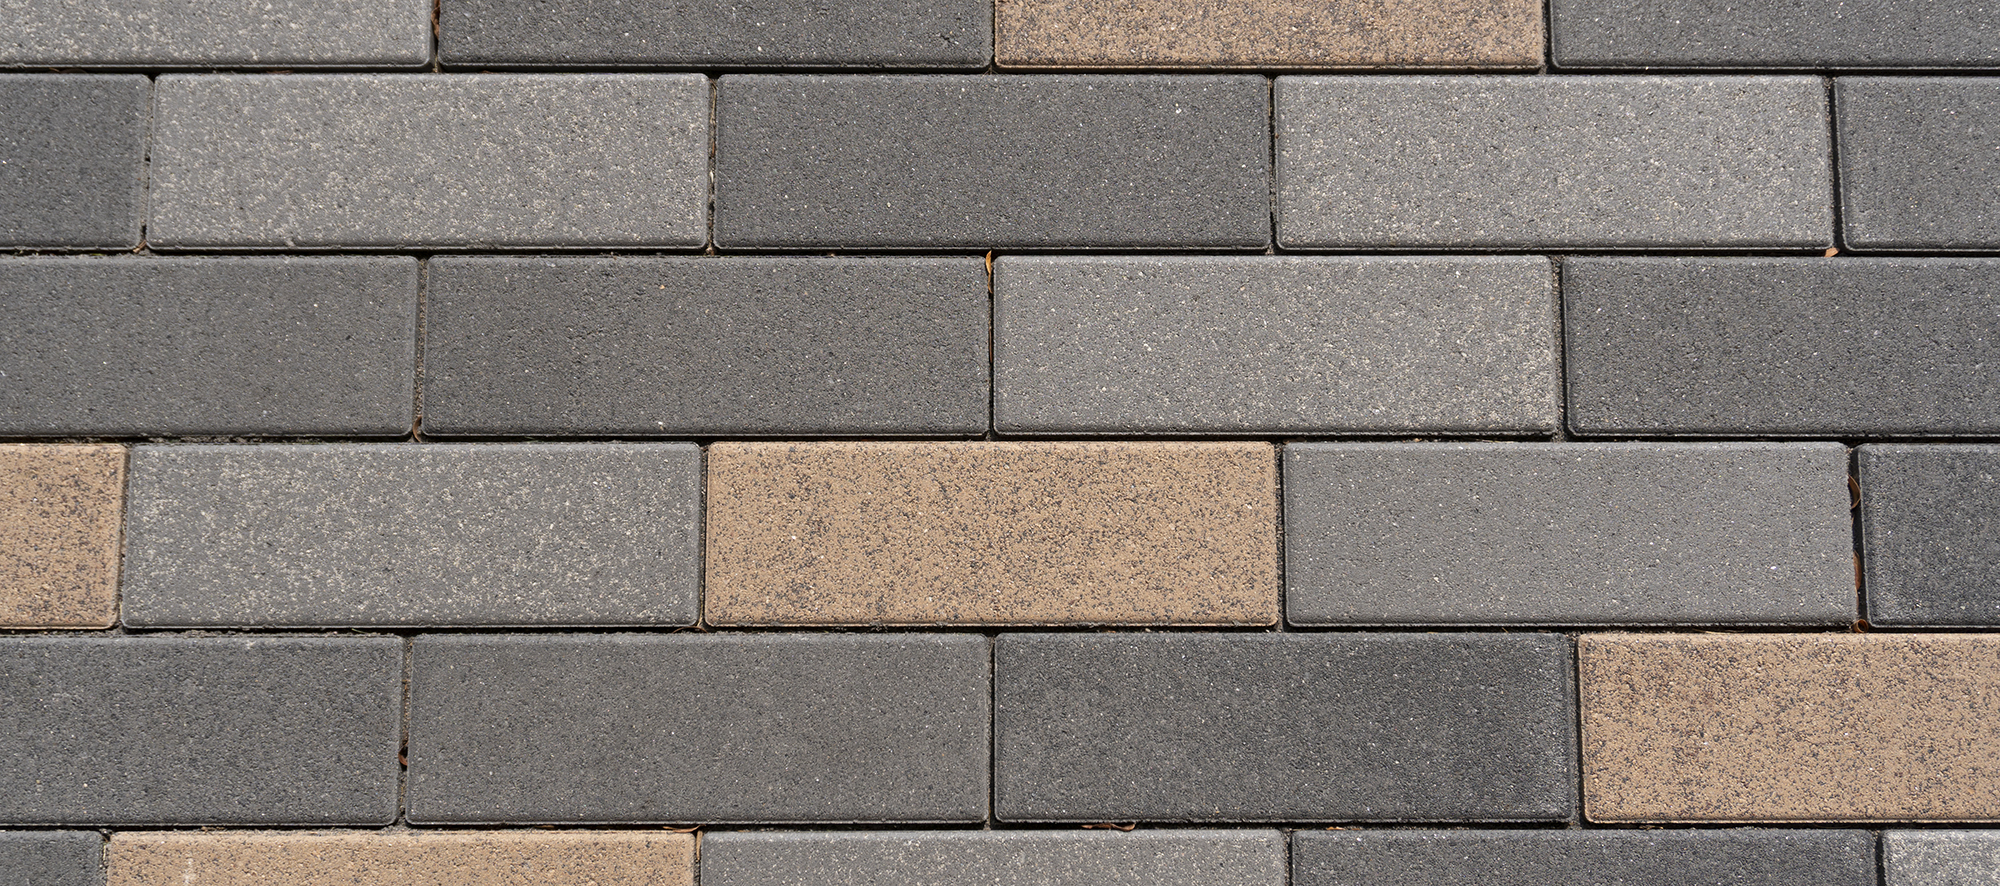 Promenade Plank pavers in three distinct colors are laid in a running bond pattern.